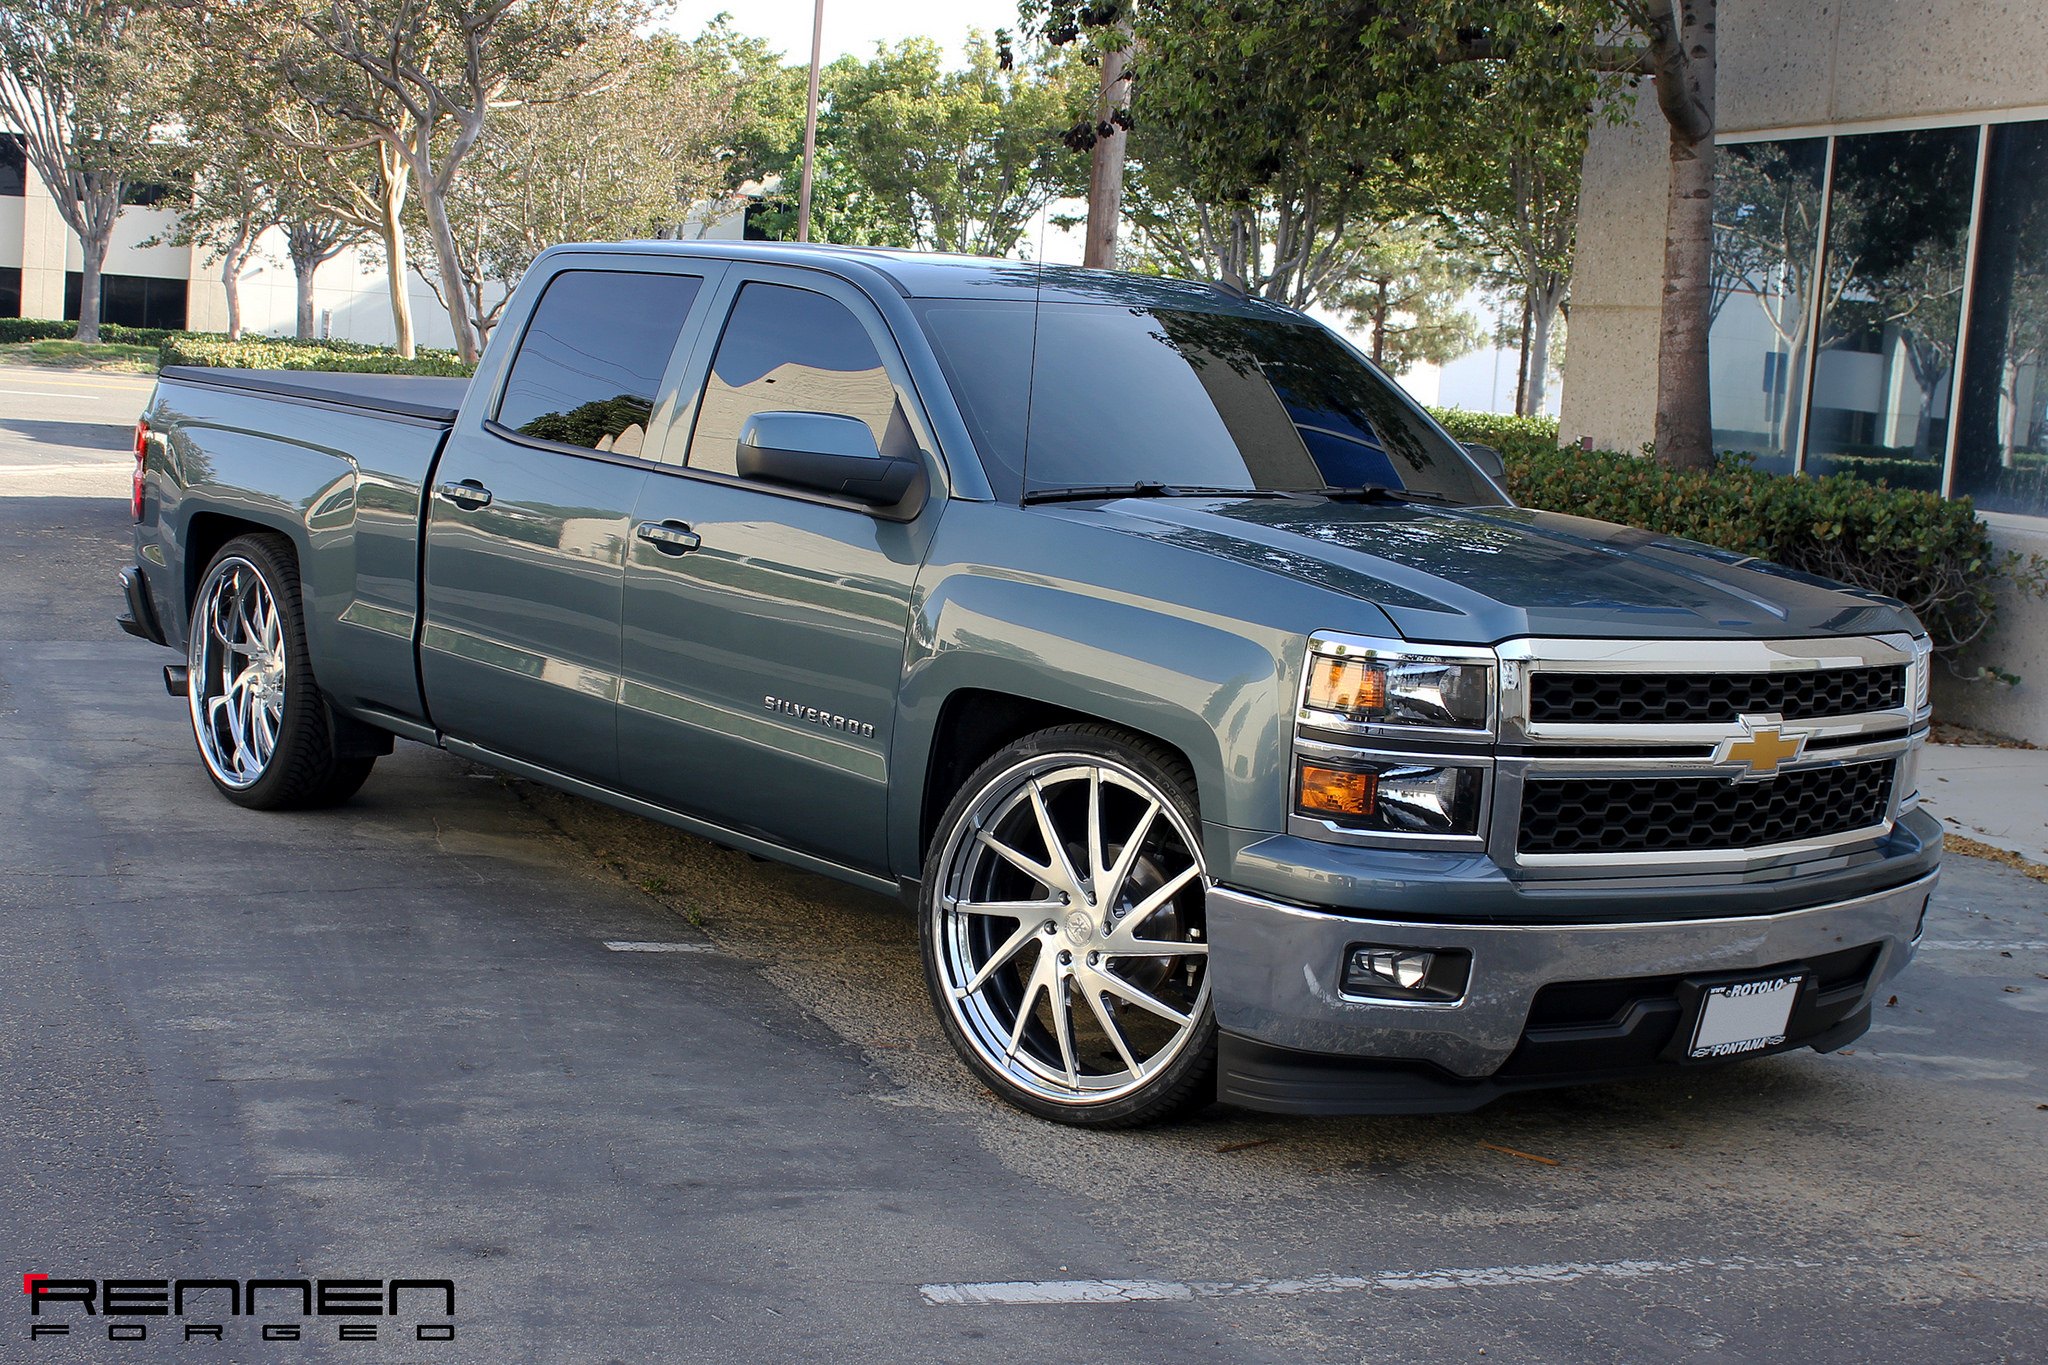 Front Bumper with Fog Lights on Gray Chevy Silverado - Photo by Rennen International